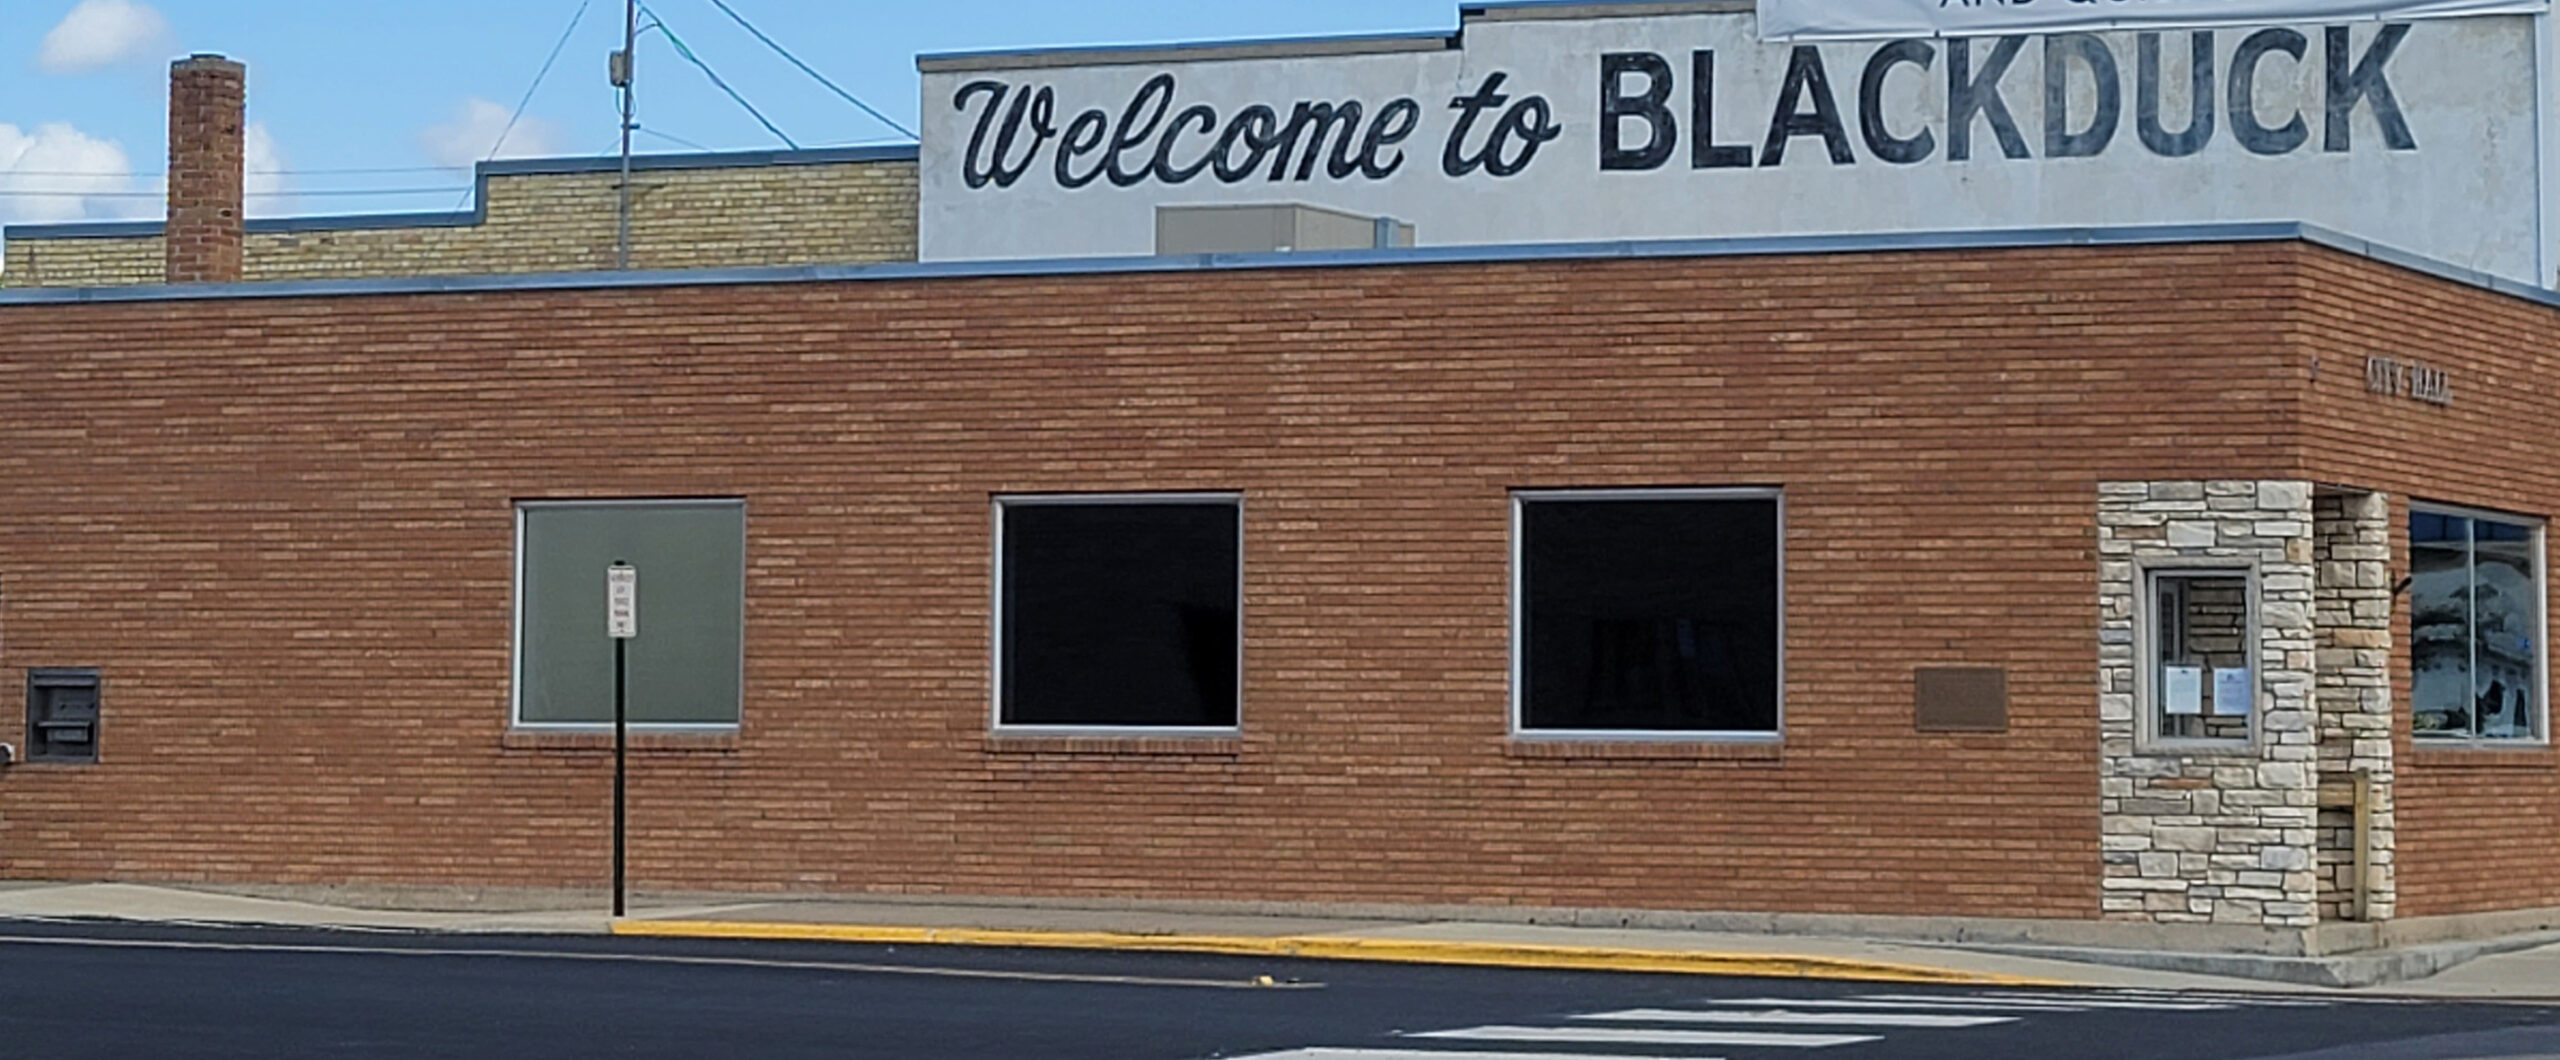 Blackduck City Hall with Welcome to Blackduck sign